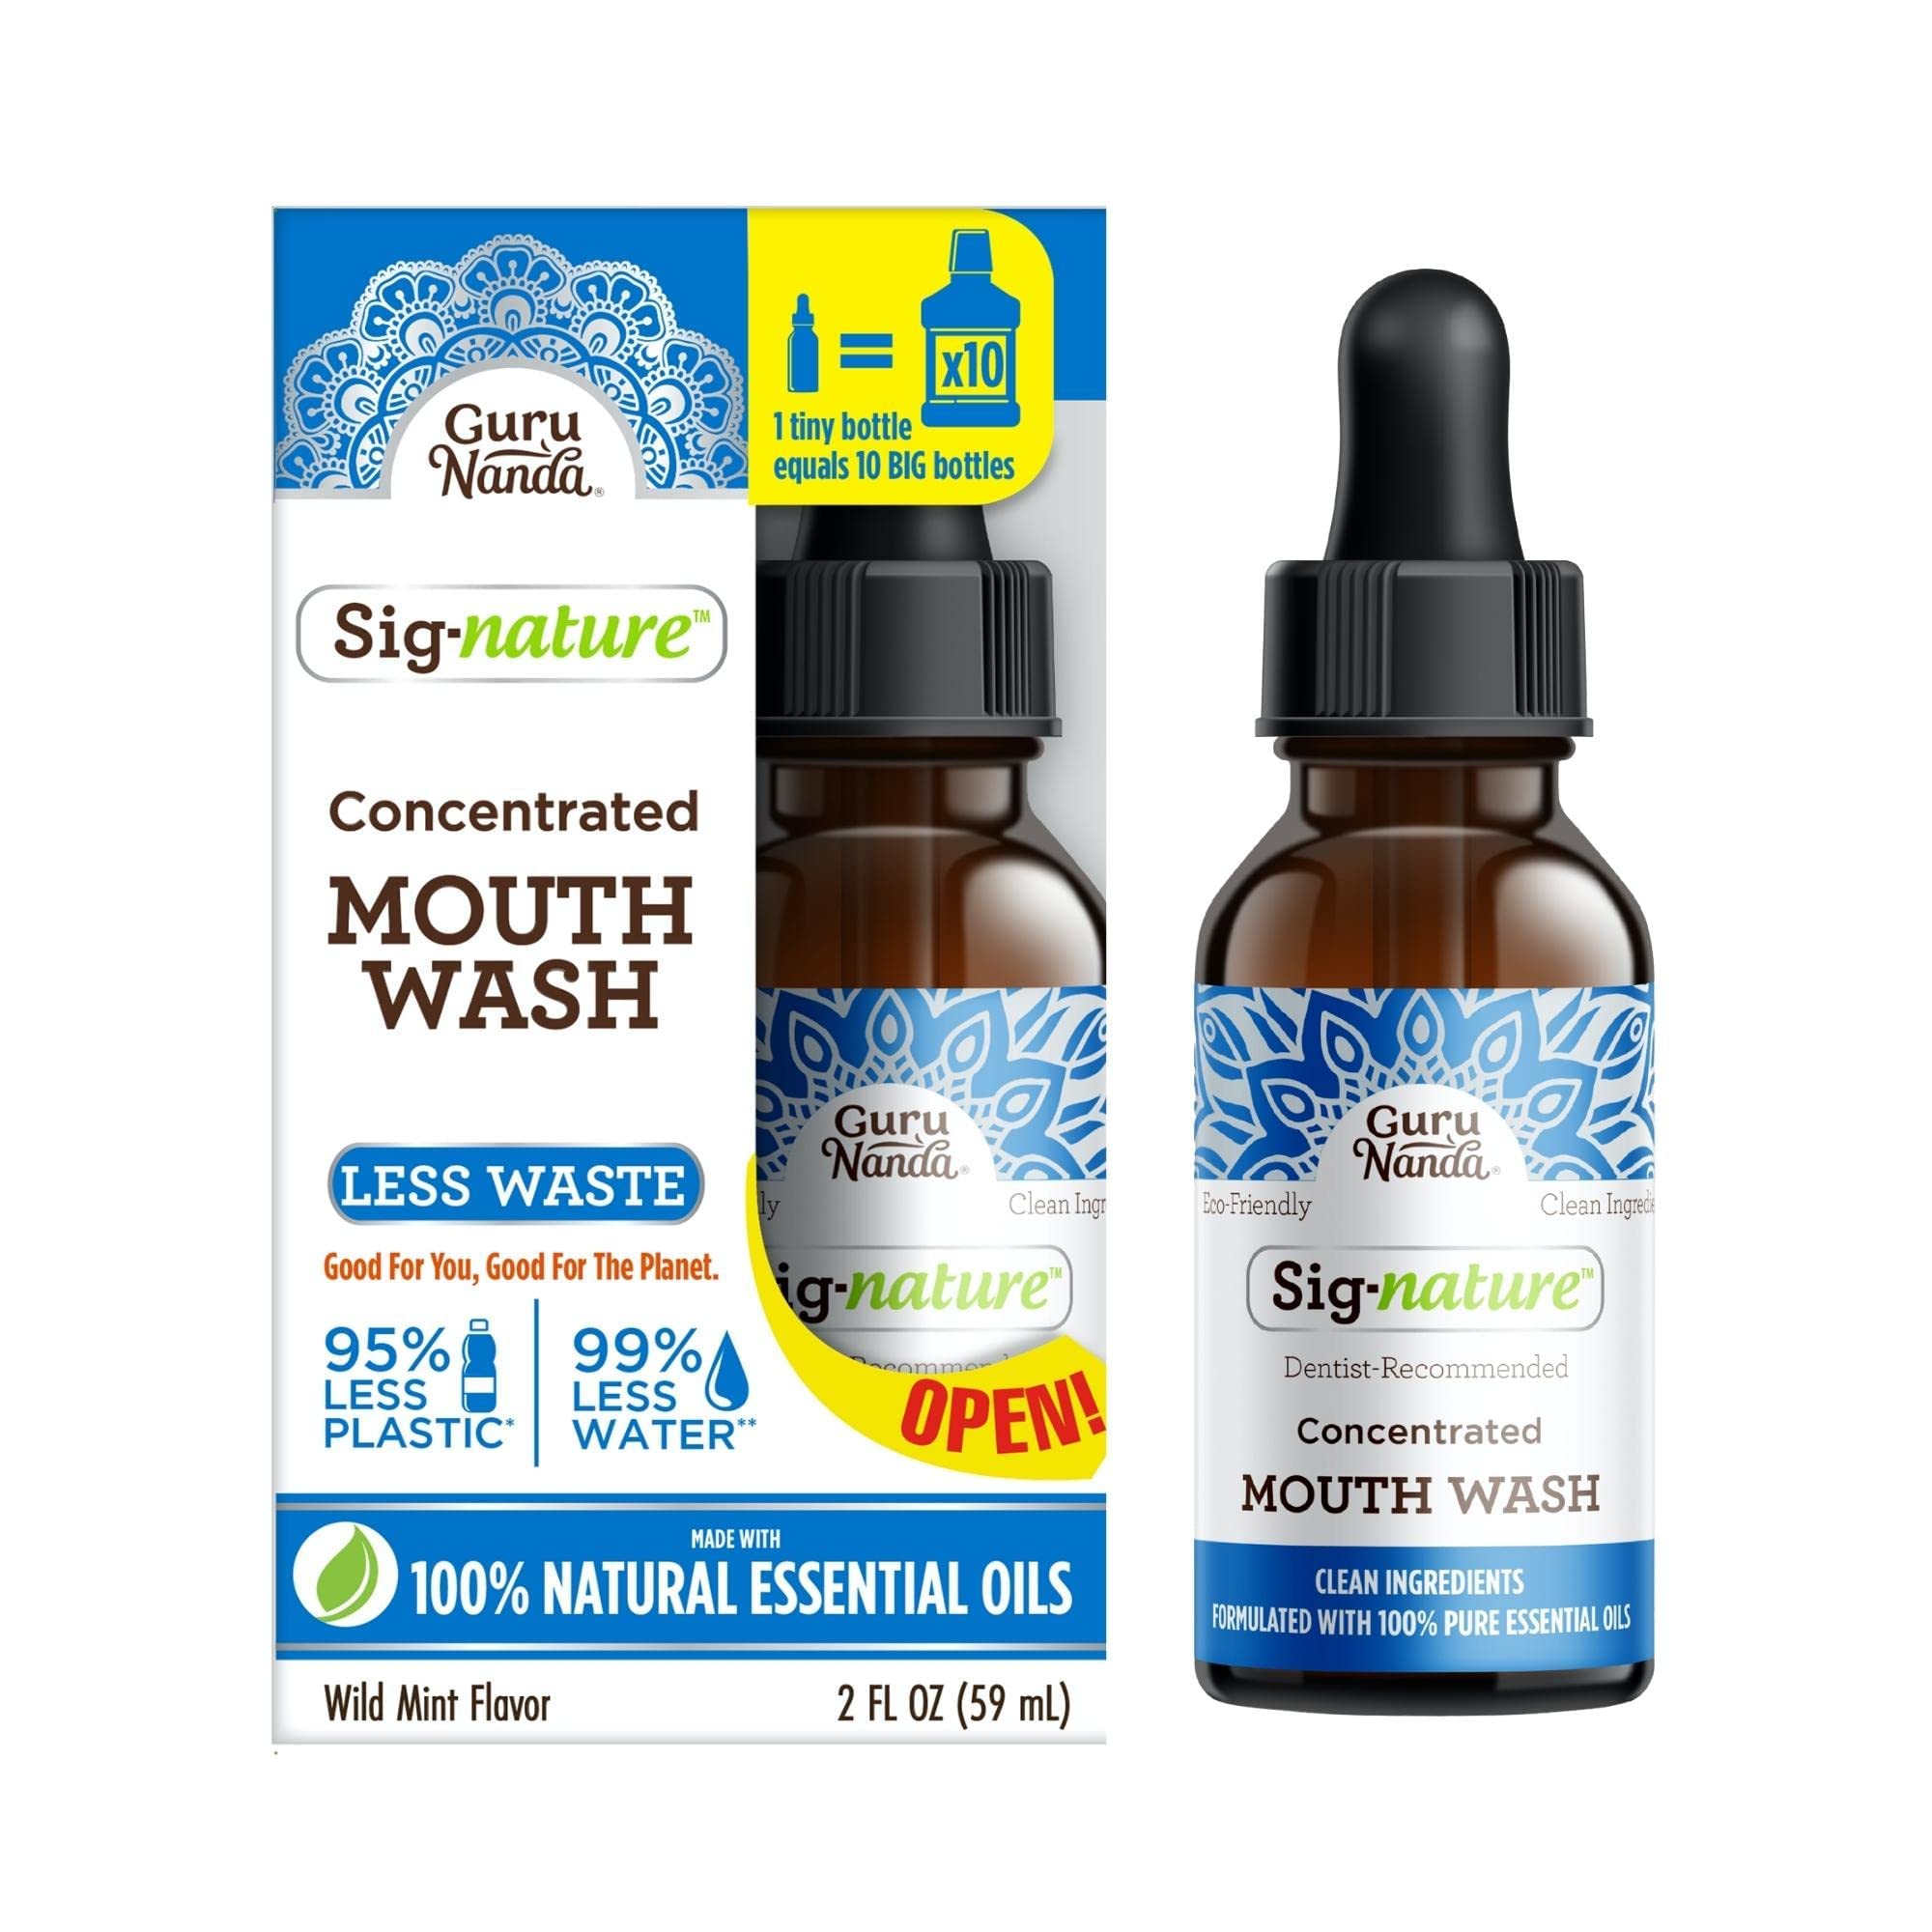 GuruNanda Concentrated Mouthwash, Helps with Bad Breath, Promotes Teeth  Whitening, Made with 100% Natural Essential Oils, 1 Bottle Equals 300  Rinse, Fluoride-Free - Mint Flavored (2 oz) 2 Fl Oz (Pack of 1)